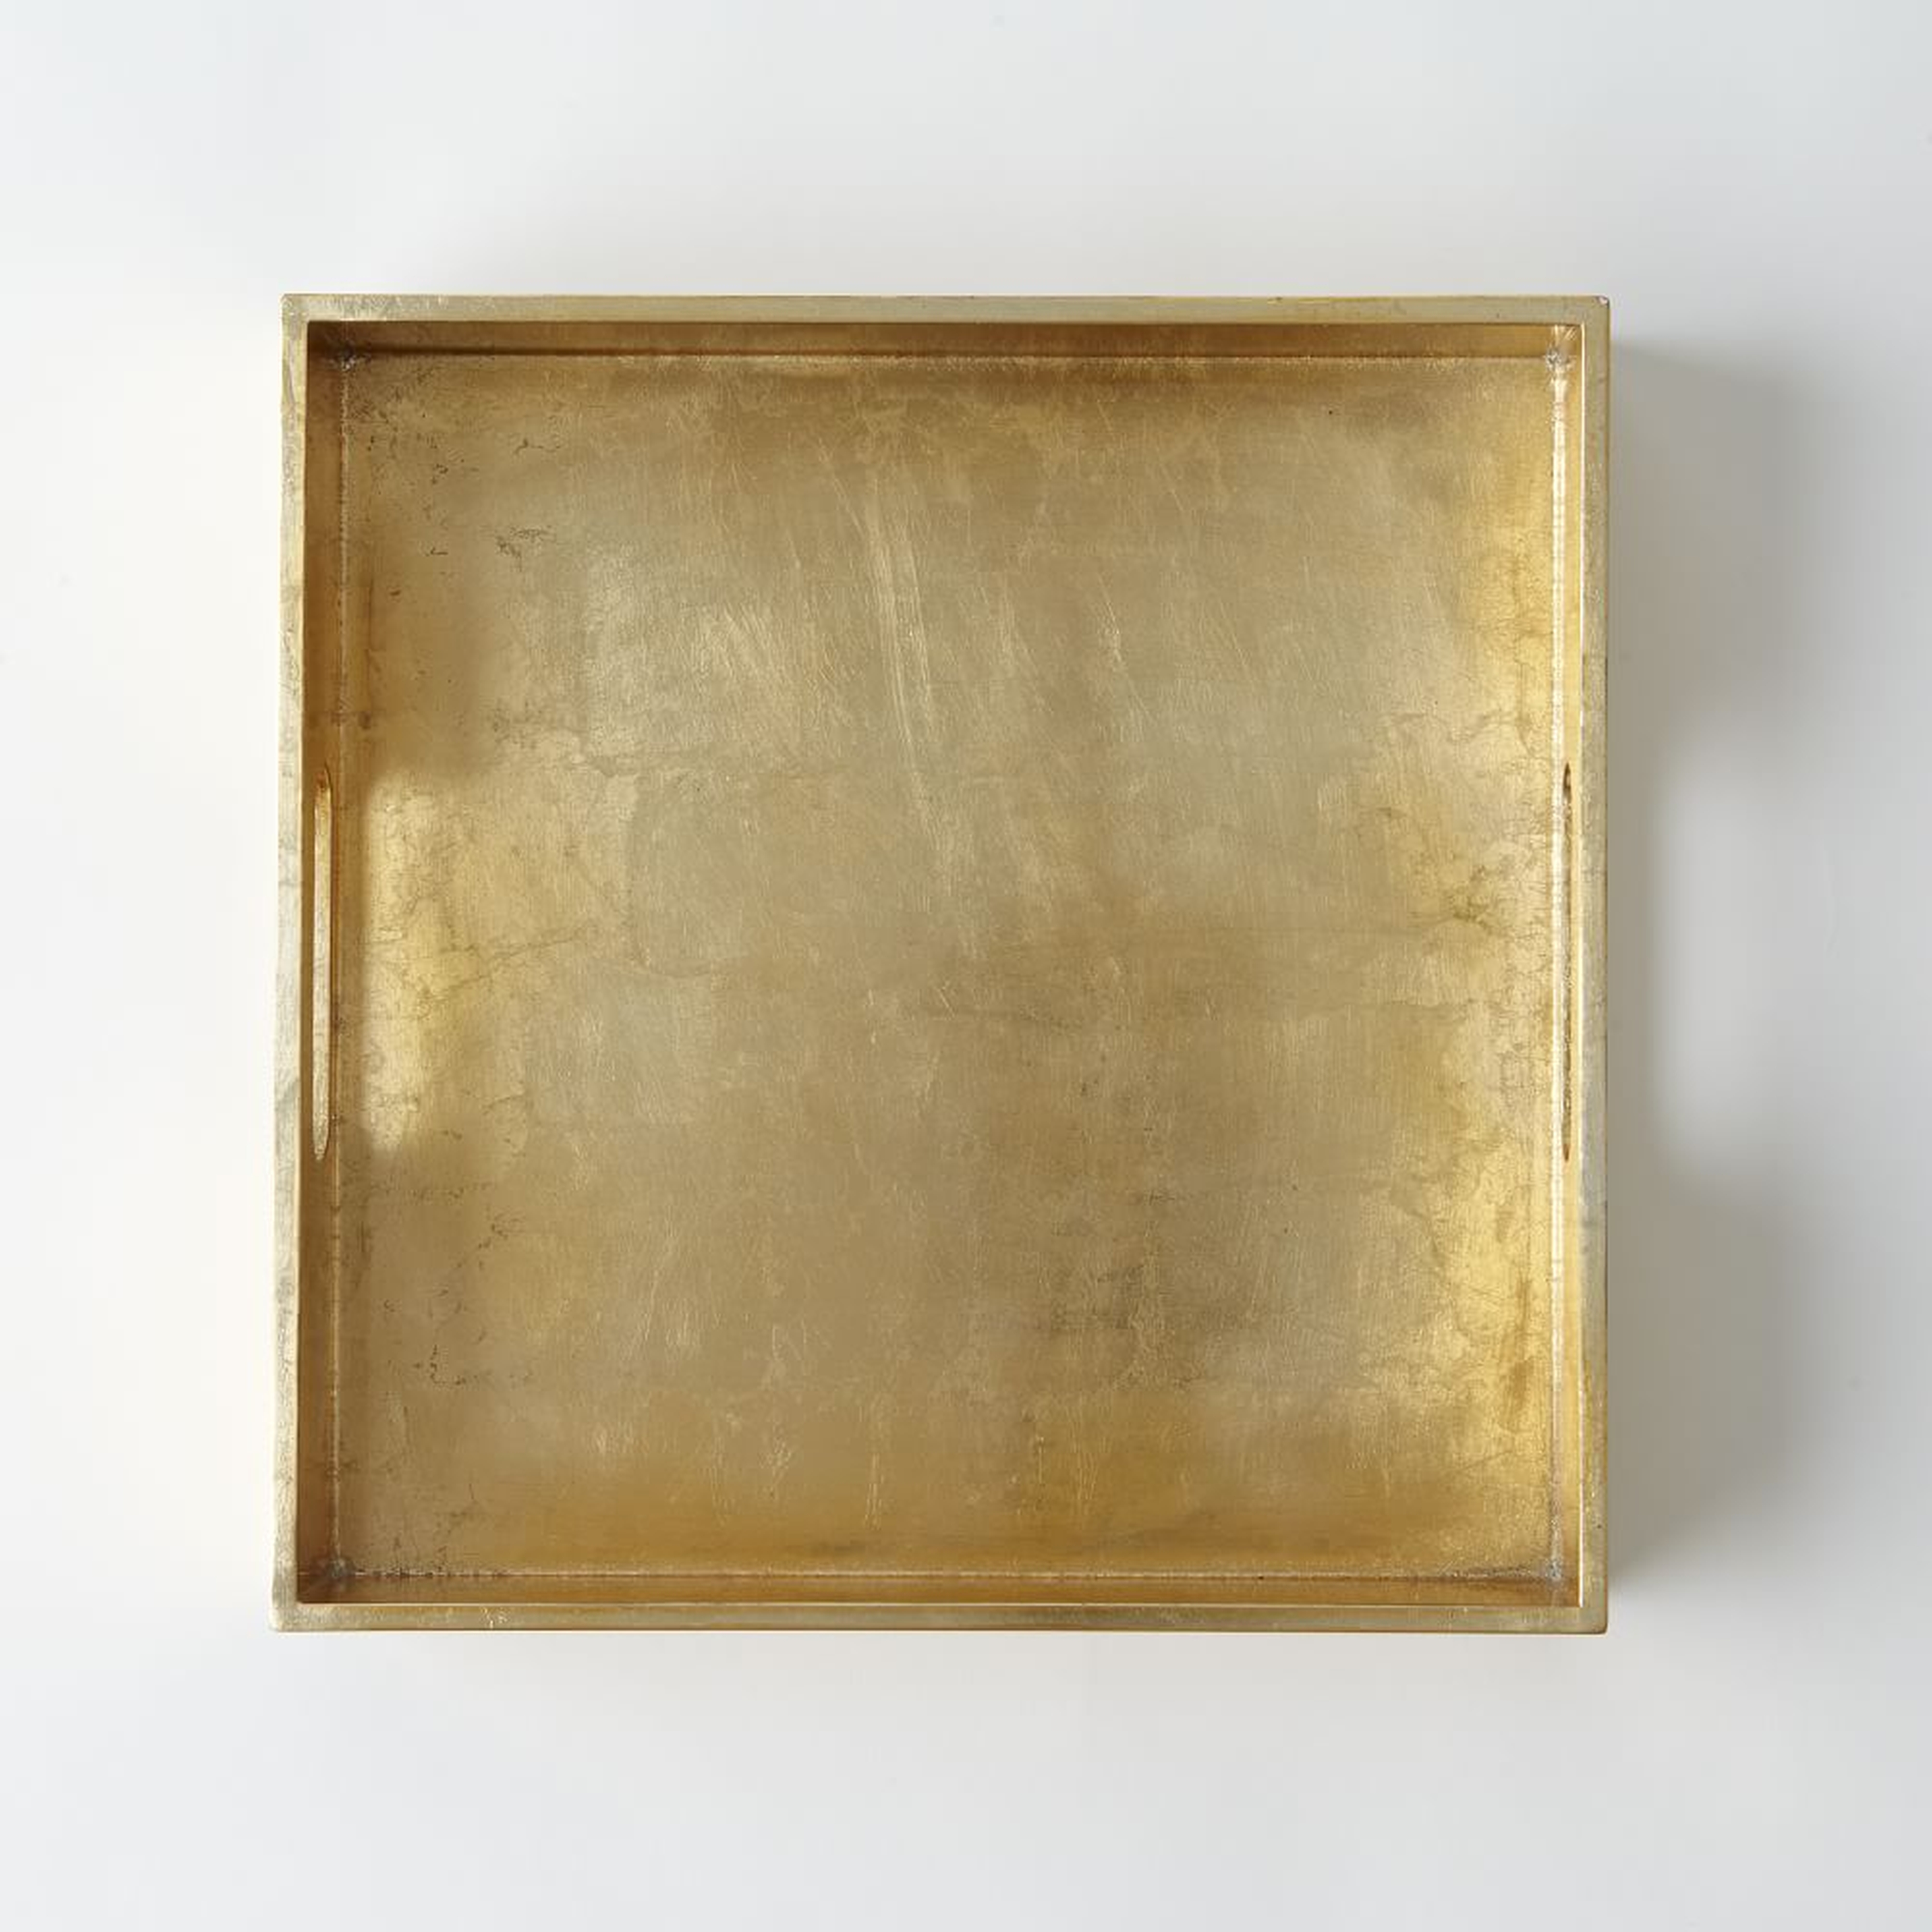 Lacquer Wood Square Tray 12"x 2.25", Gold - West Elm